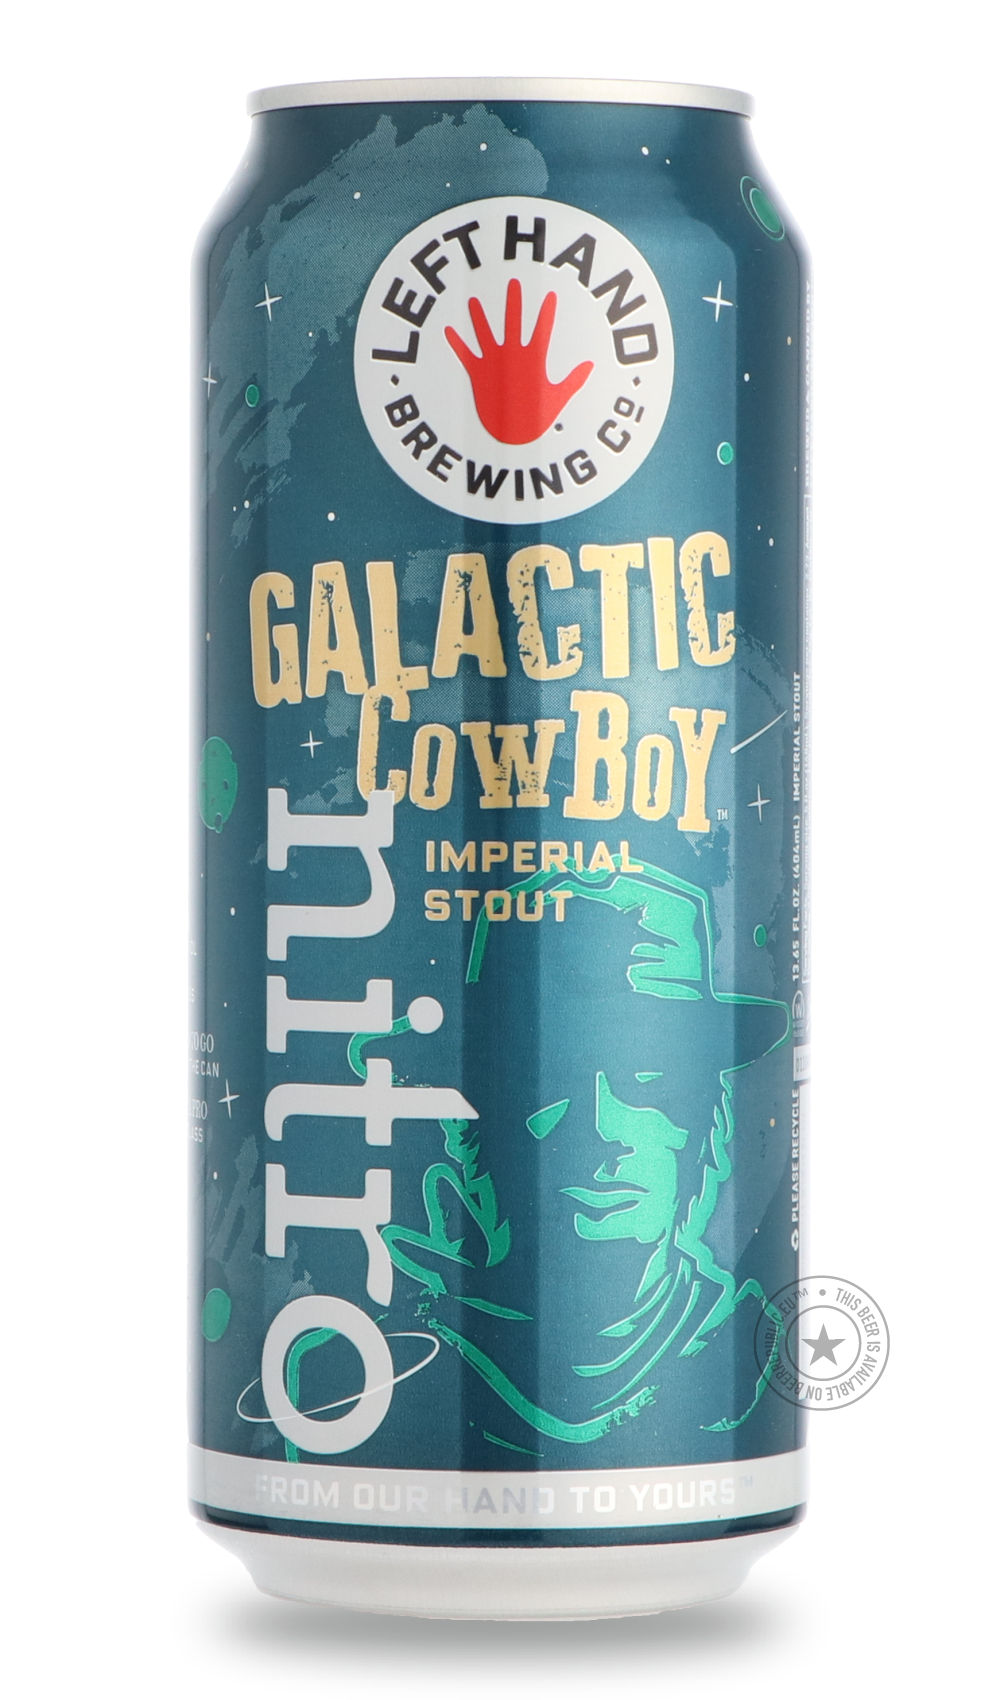 -Left Hand- Galactic Cowboy Nitro-Stout & Porter- Only @ Beer Republic - The best online beer store for American & Canadian craft beer - Buy beer online from the USA and Canada - Bier online kopen - Amerikaans bier kopen - Craft beer store - Craft beer kopen - Amerikanisch bier kaufen - Bier online kaufen - Acheter biere online - IPA - Stout - Porter - New England IPA - Hazy IPA - Imperial Stout - Barrel Aged - Barrel Aged Imperial Stout - Brown - Dark beer - Blond - Blonde - Pilsner - Lager - Wheat - Weize